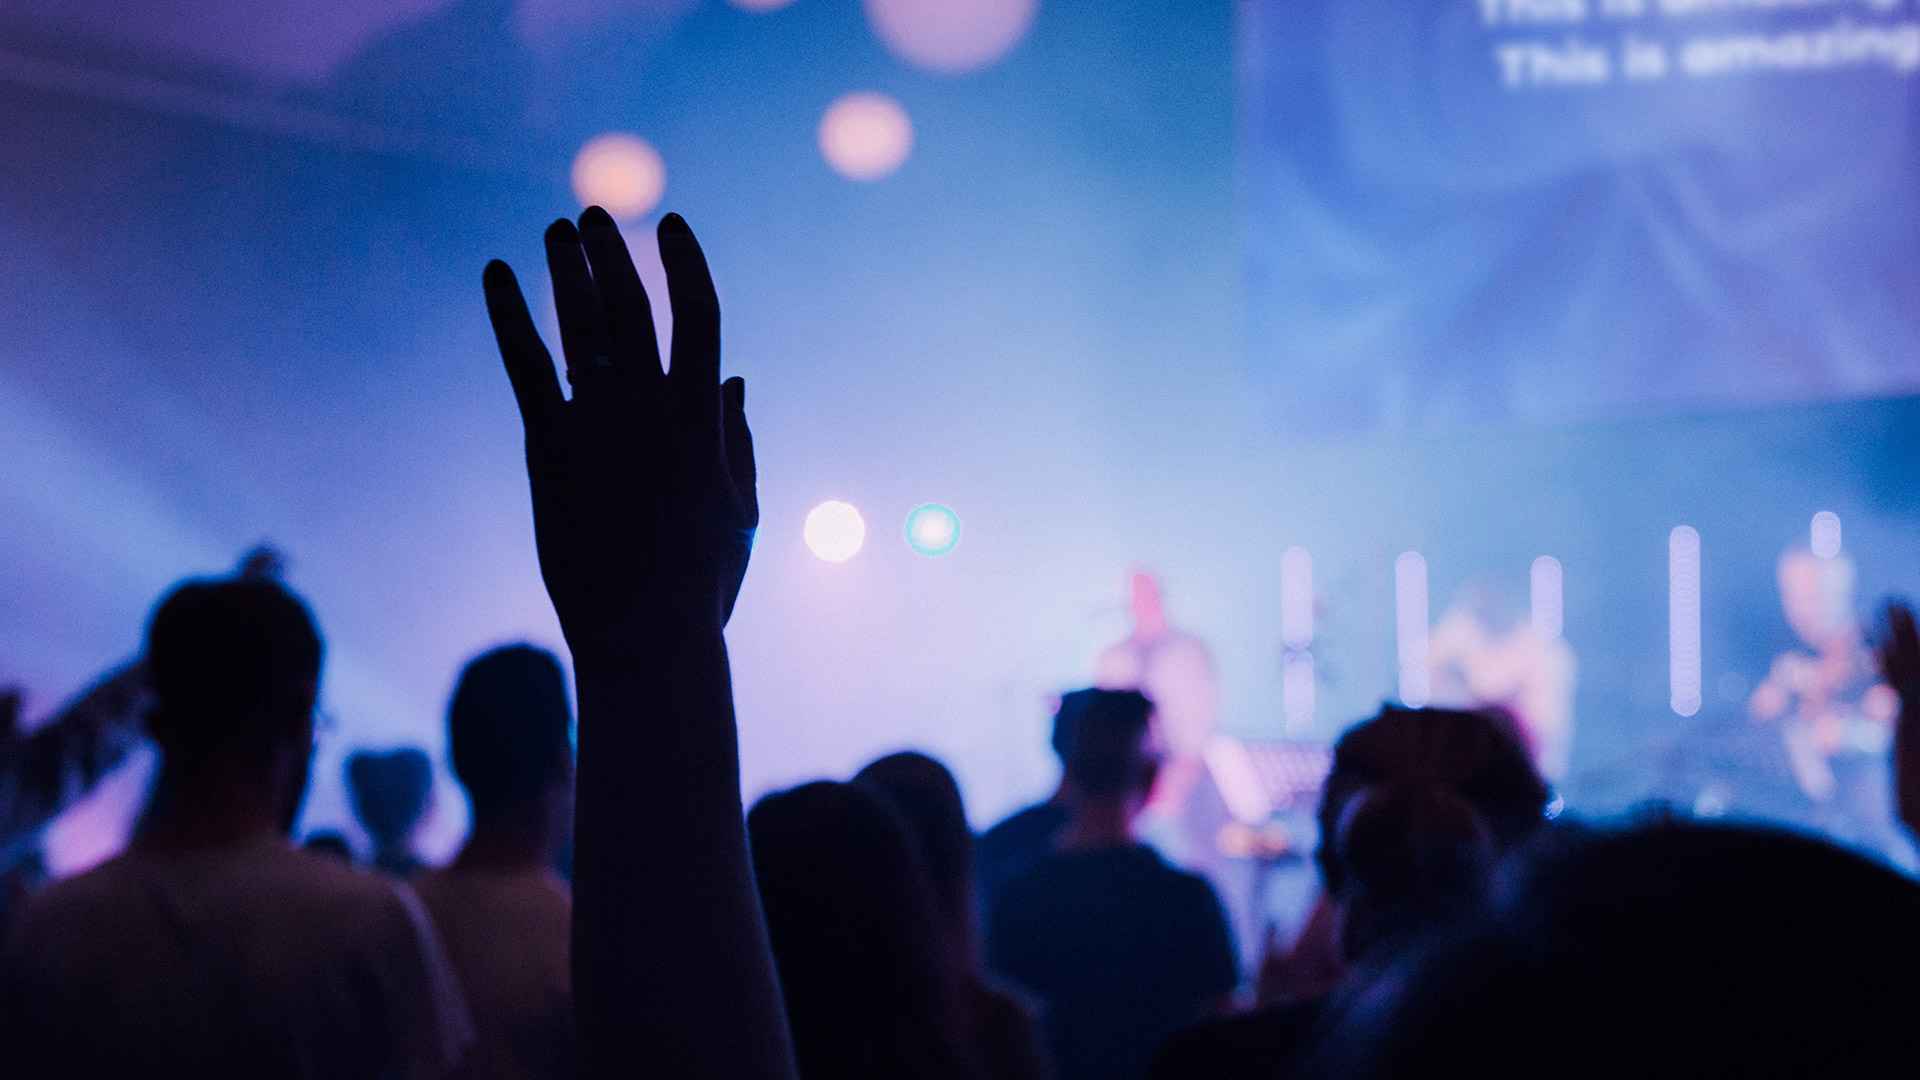 We’ve Handpicked Backgrounds for the Top 10 Worship Songs of Easter 2020